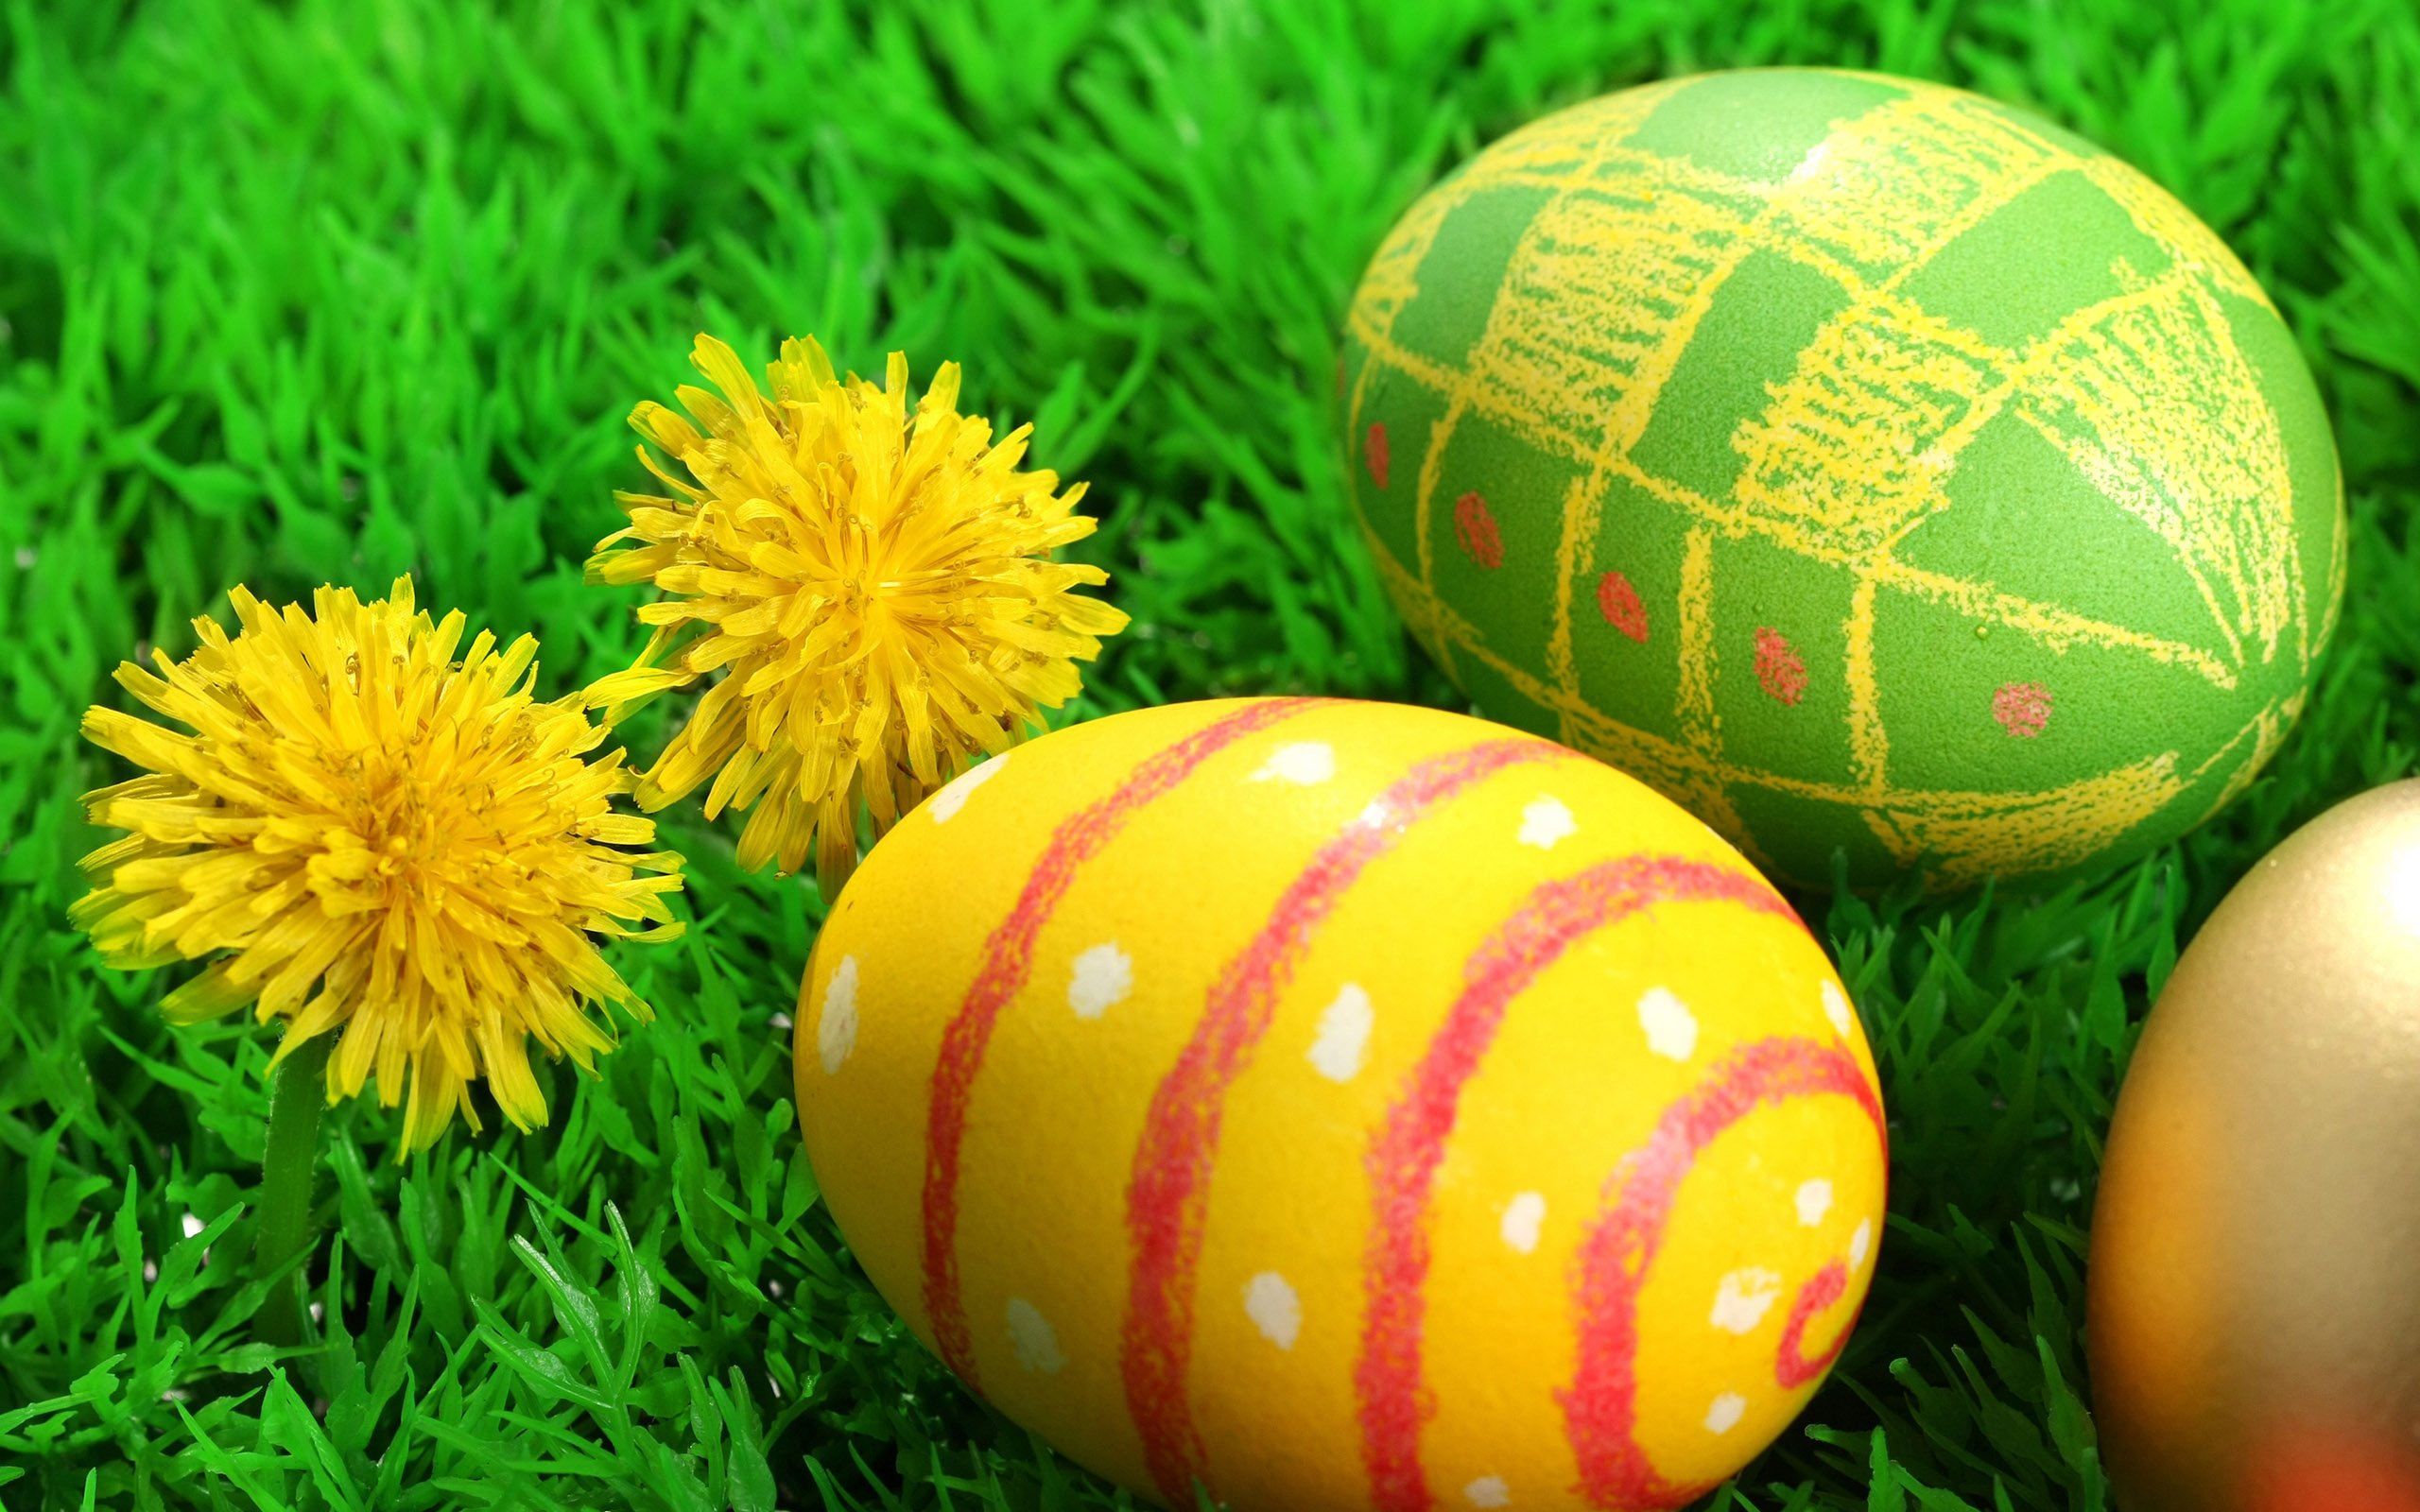  chicks and easter eggs wallpapers for your desktop backgrounds